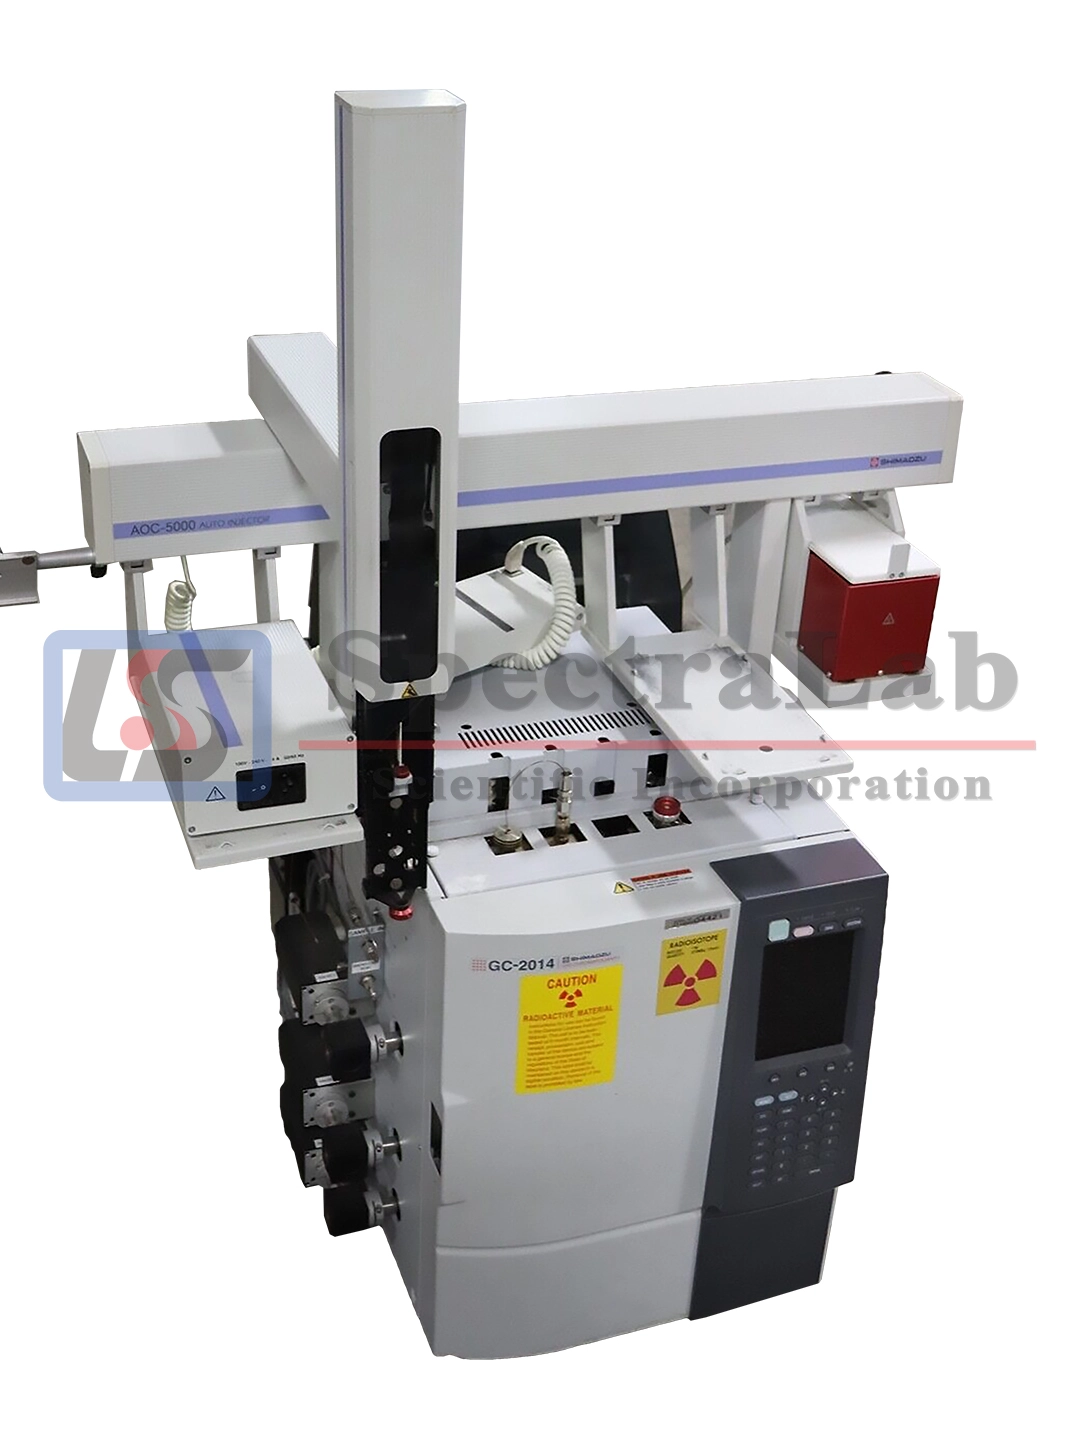 Shimadzu GC-2014 with ECD and FID with AOC-5000 Autosampler